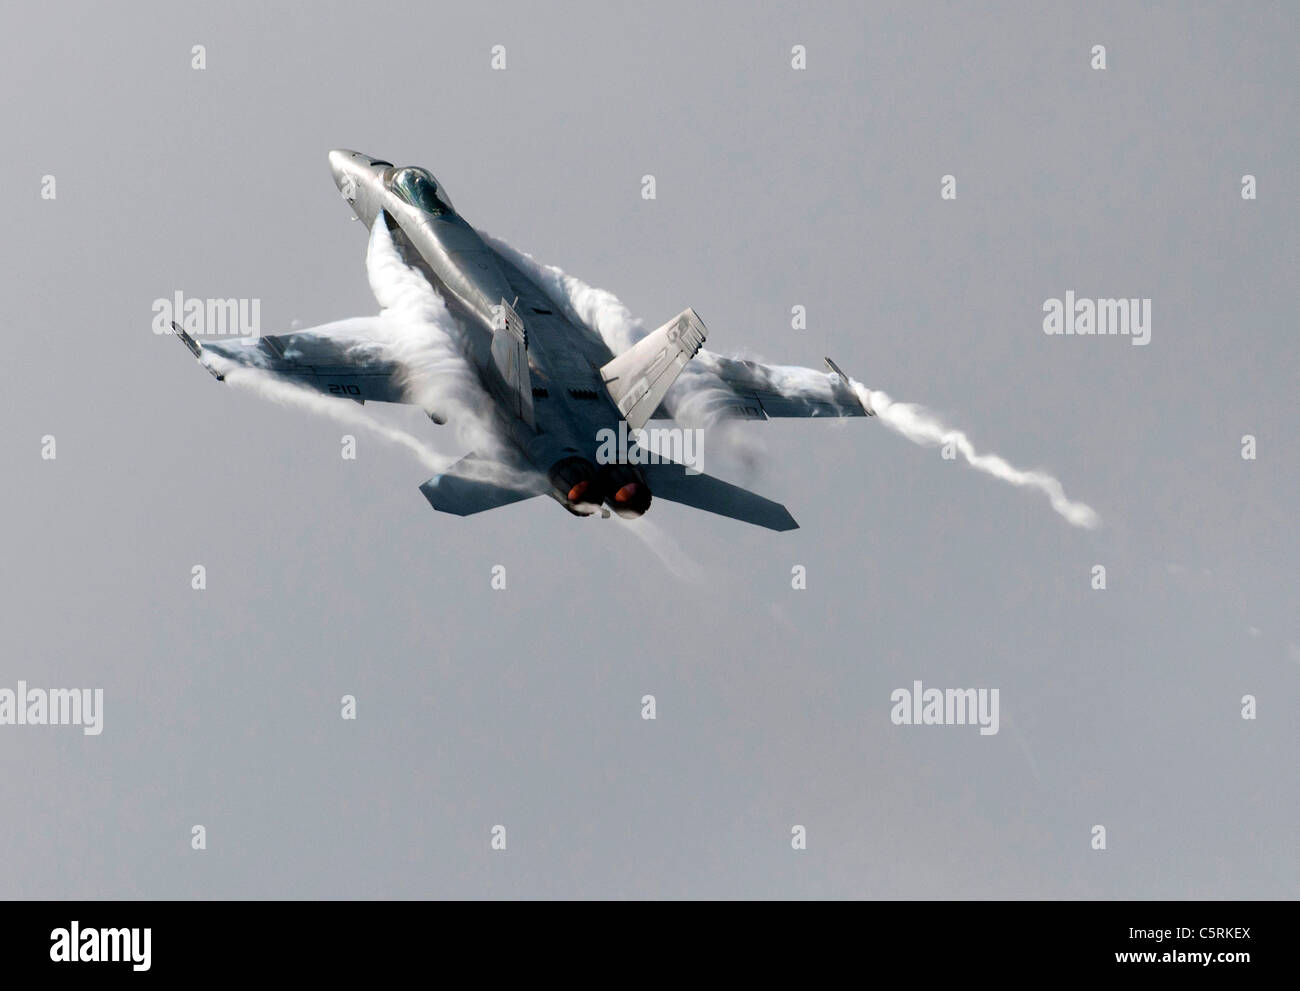 F/A-18E Super Hornet maneuvering breaking the sound barrier F18 F-18 Stock Photo